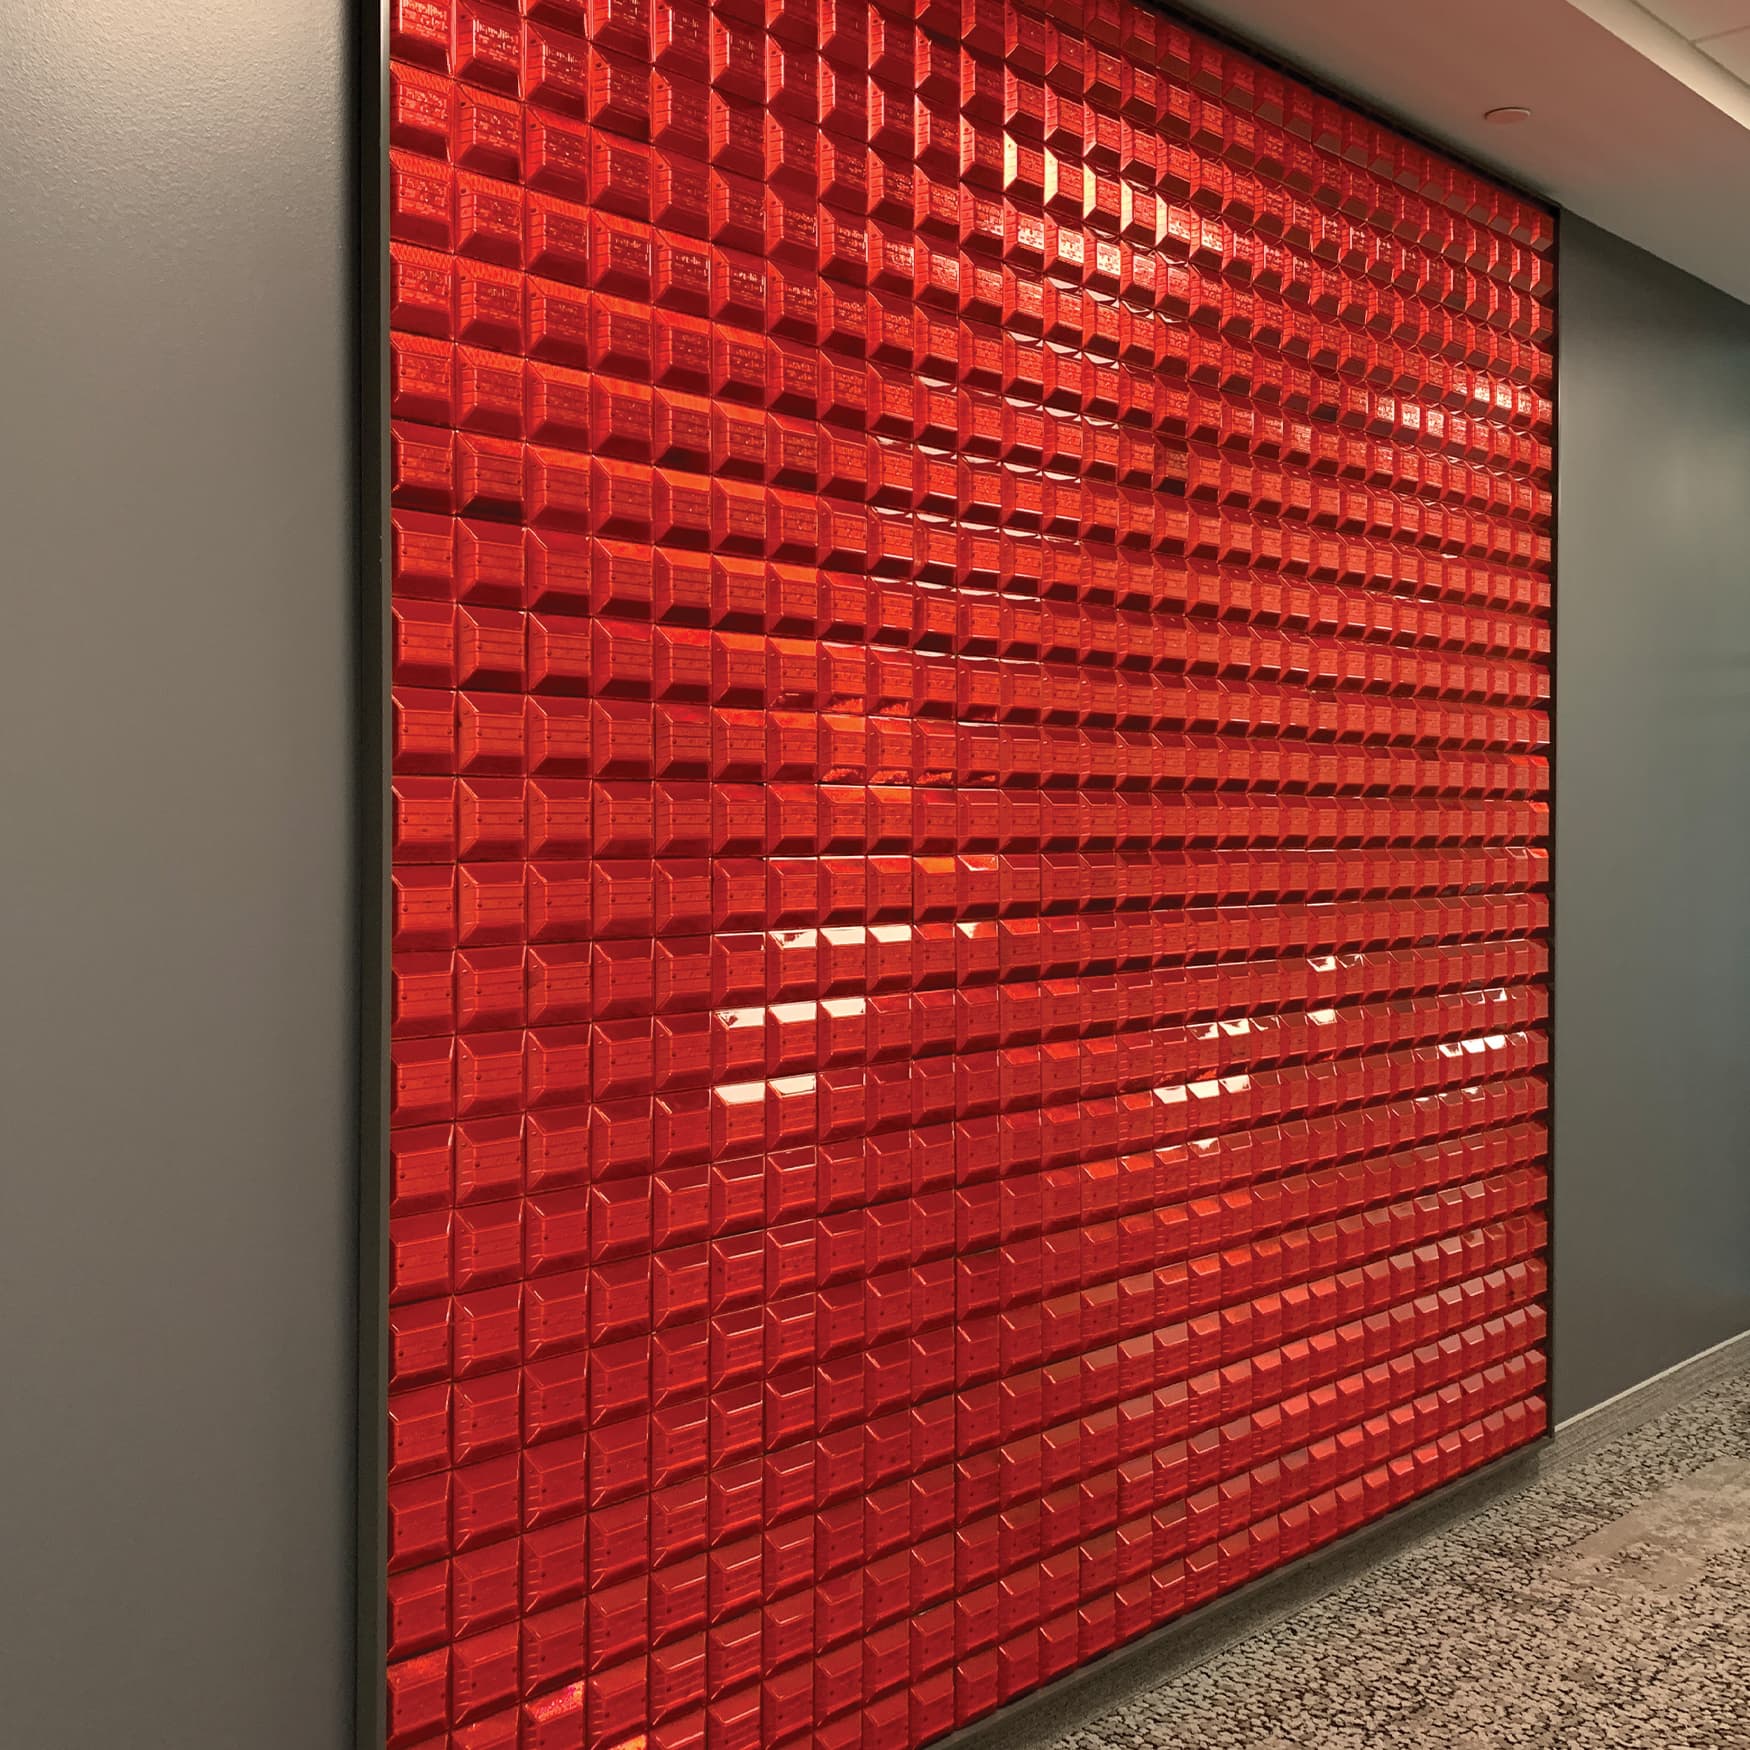 Speciality art mural by RSM Design for JMFE Headquarters consisting of red speed bumps for office workplace design.